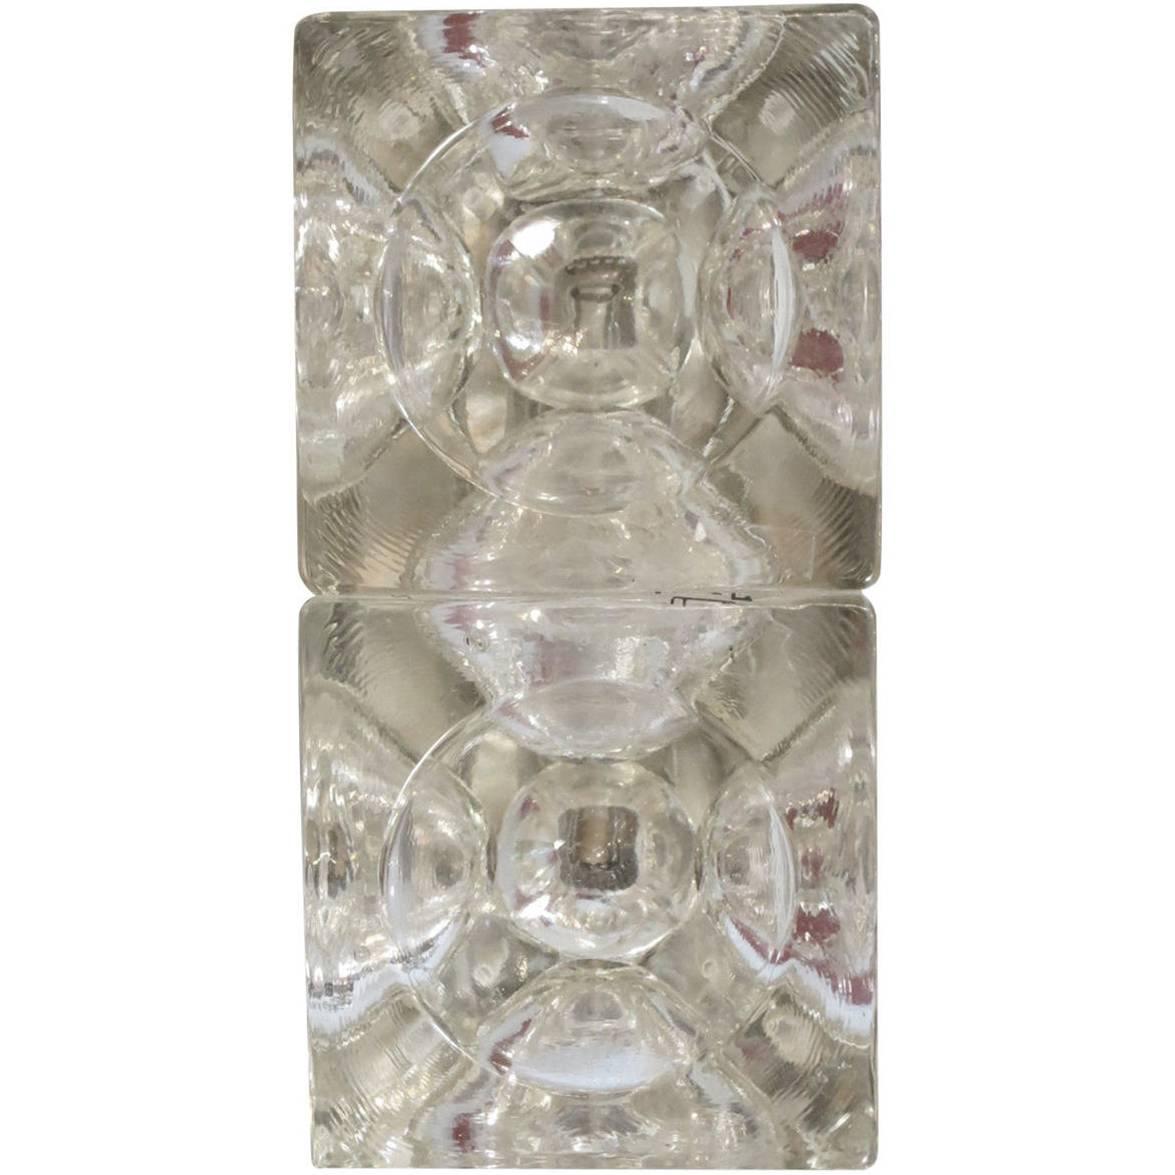 Mid-Century Modern Italian Murano Cube Glass Sconce or Flush Mount by Poliarte